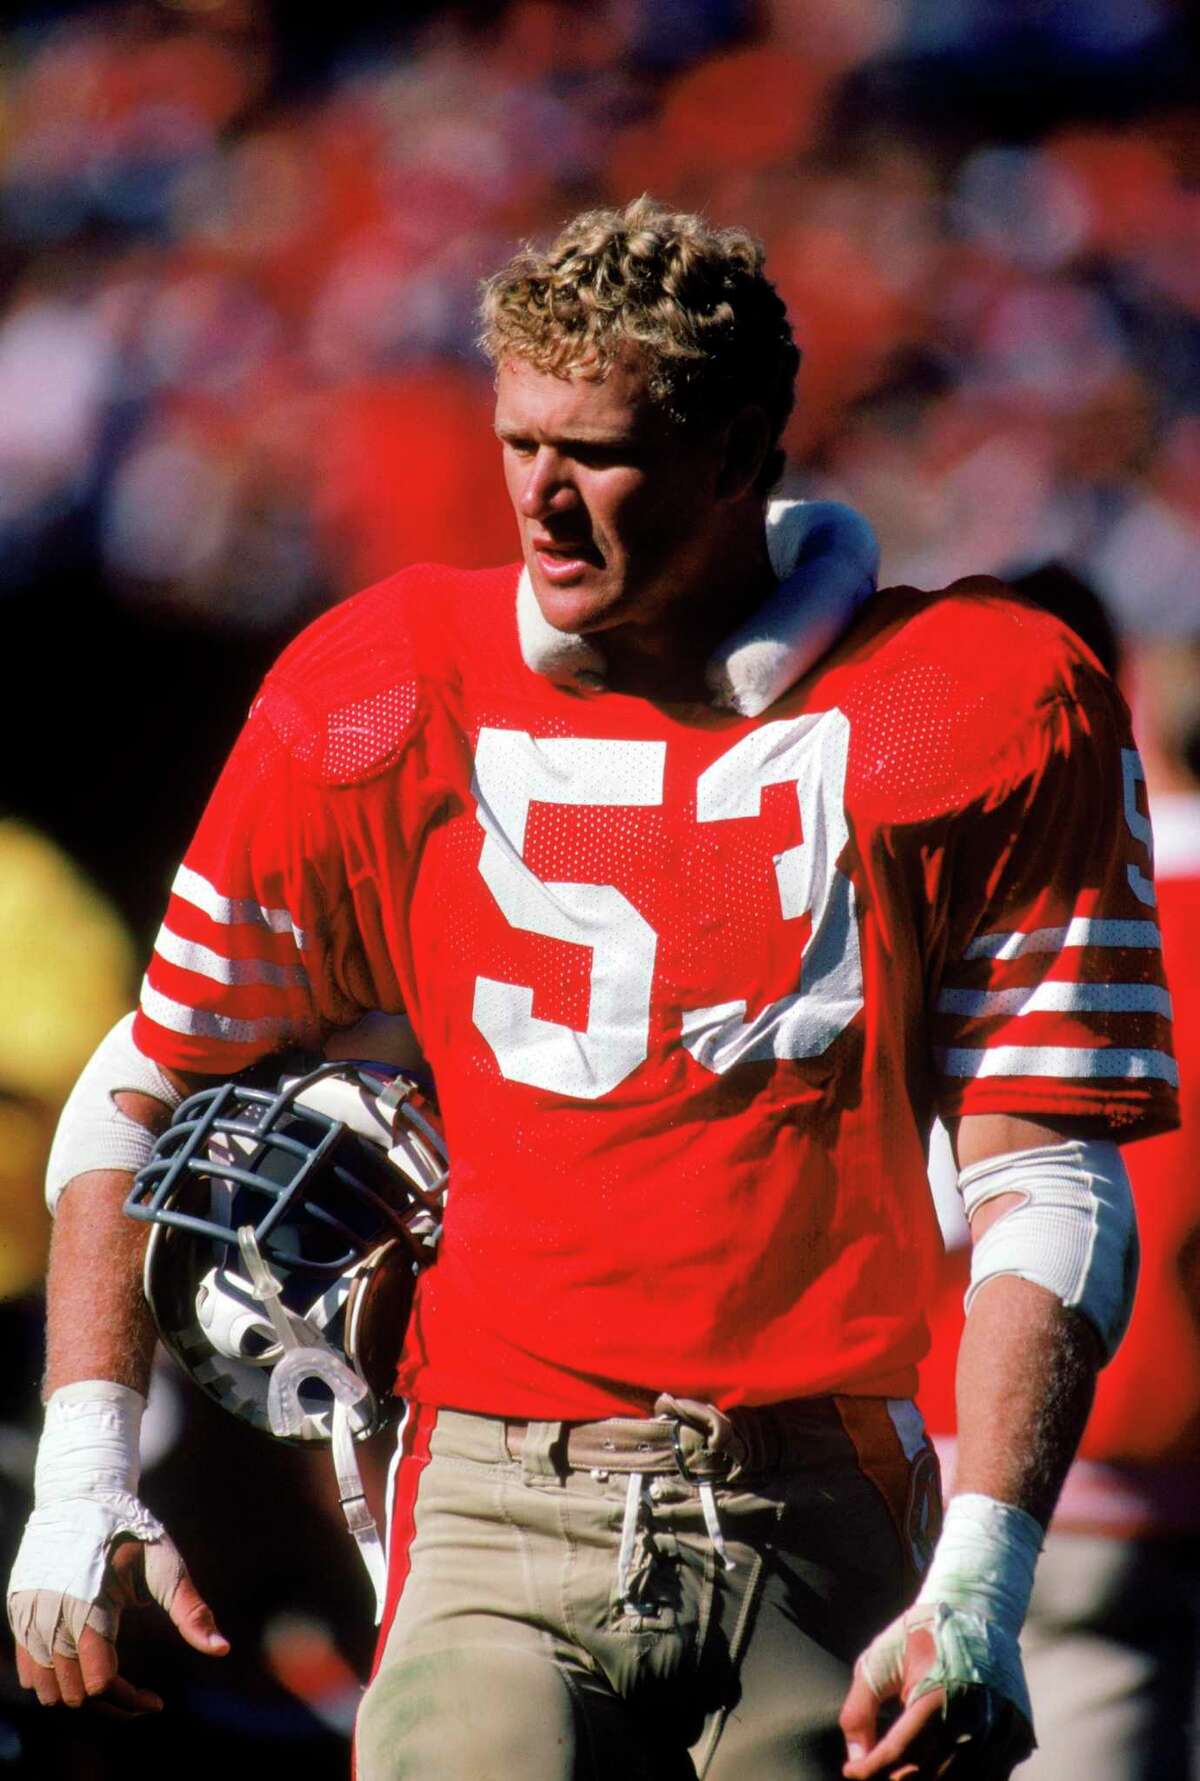 Linebacker Milt McColl of the 49ers plays against the New Orleans Saints at Candlestick Park in 1986. The 49ers won 26-17.